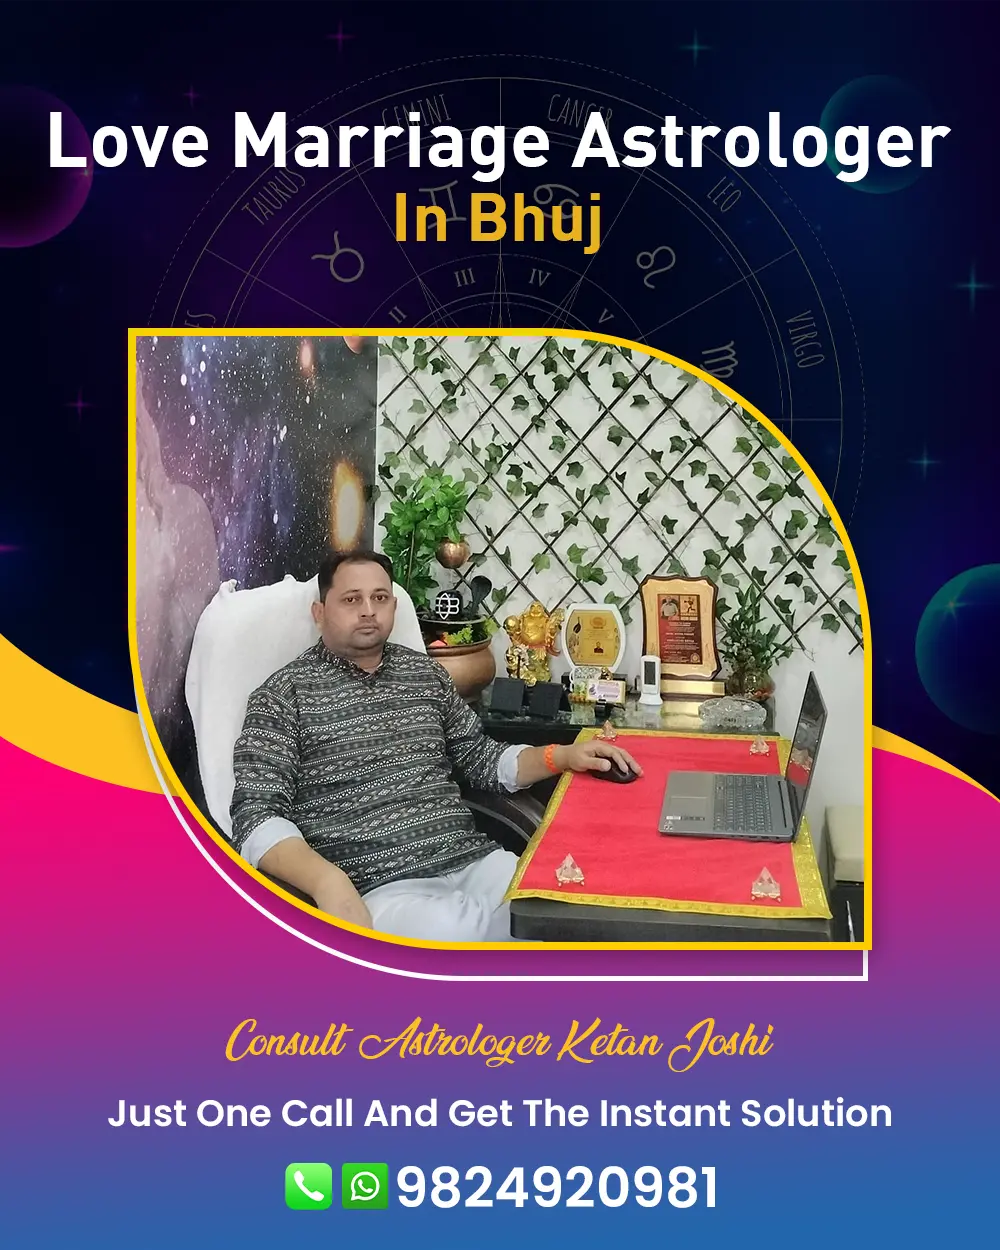 Love Marriage Astrologer In Bhuj